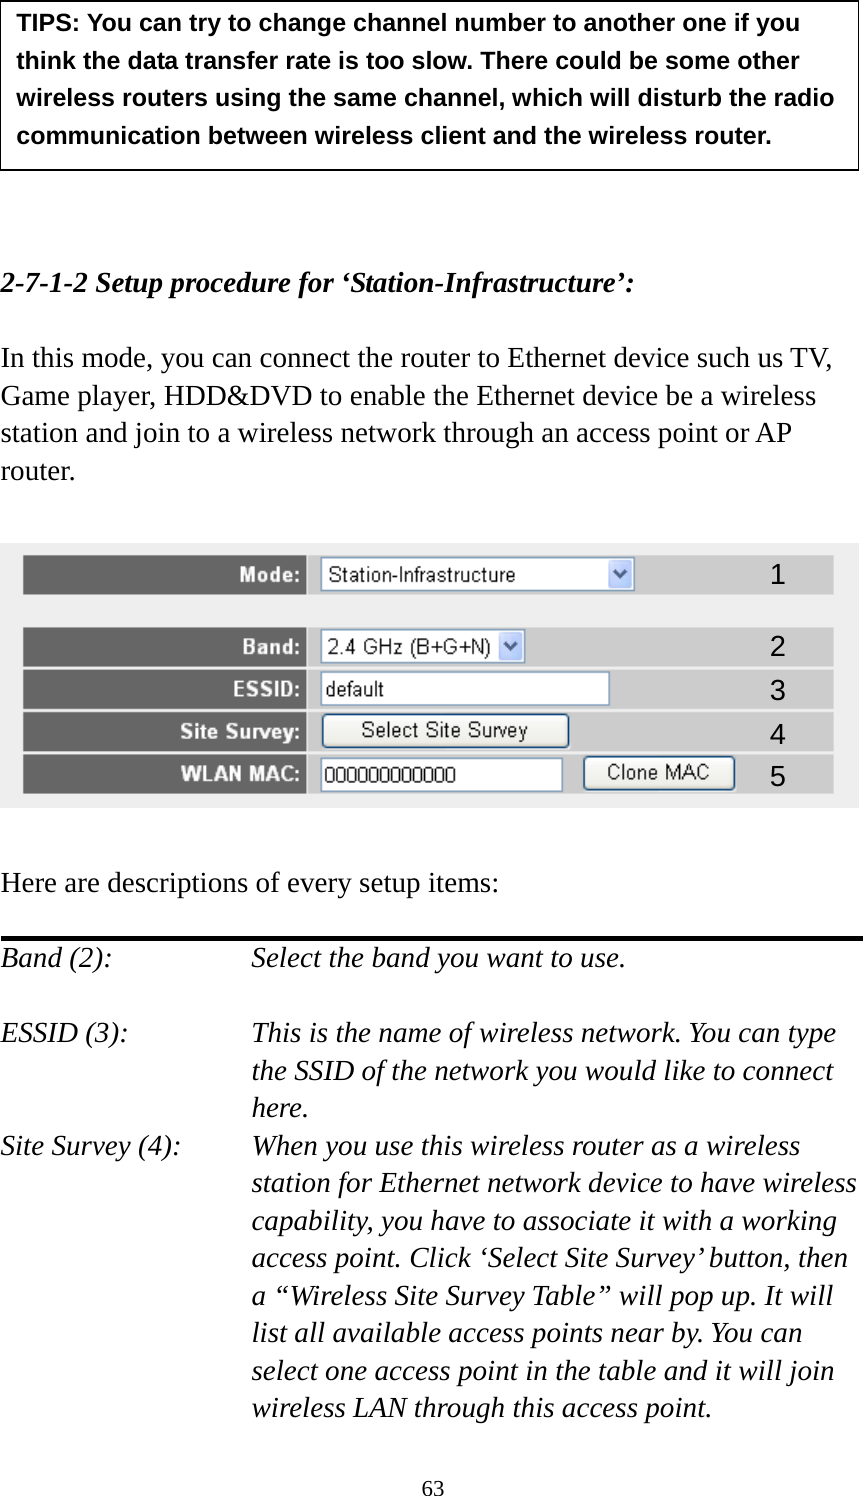 63        2-7-1-2 Setup procedure for ‘Station-Infrastructure’:  In this mode, you can connect the router to Ethernet device such us TV, Game player, HDD&amp;DVD to enable the Ethernet device be a wireless station and join to a wireless network through an access point or AP router.    Here are descriptions of every setup items:  Band (2):  Select the band you want to use.  ESSID (3):  This is the name of wireless network. You can type the SSID of the network you would like to connect here. Site Survey (4):  When you use this wireless router as a wireless station for Ethernet network device to have wireless capability, you have to associate it with a working access point. Click ‘Select Site Survey’ button, then a “Wireless Site Survey Table” will pop up. It will list all available access points near by. You can select one access point in the table and it will join wireless LAN through this access point. TIPS: You can try to change channel number to another one if you think the data transfer rate is too slow. There could be some other wireless routers using the same channel, which will disturb the radio communication between wireless client and the wireless router. 1 2 3 4 5 